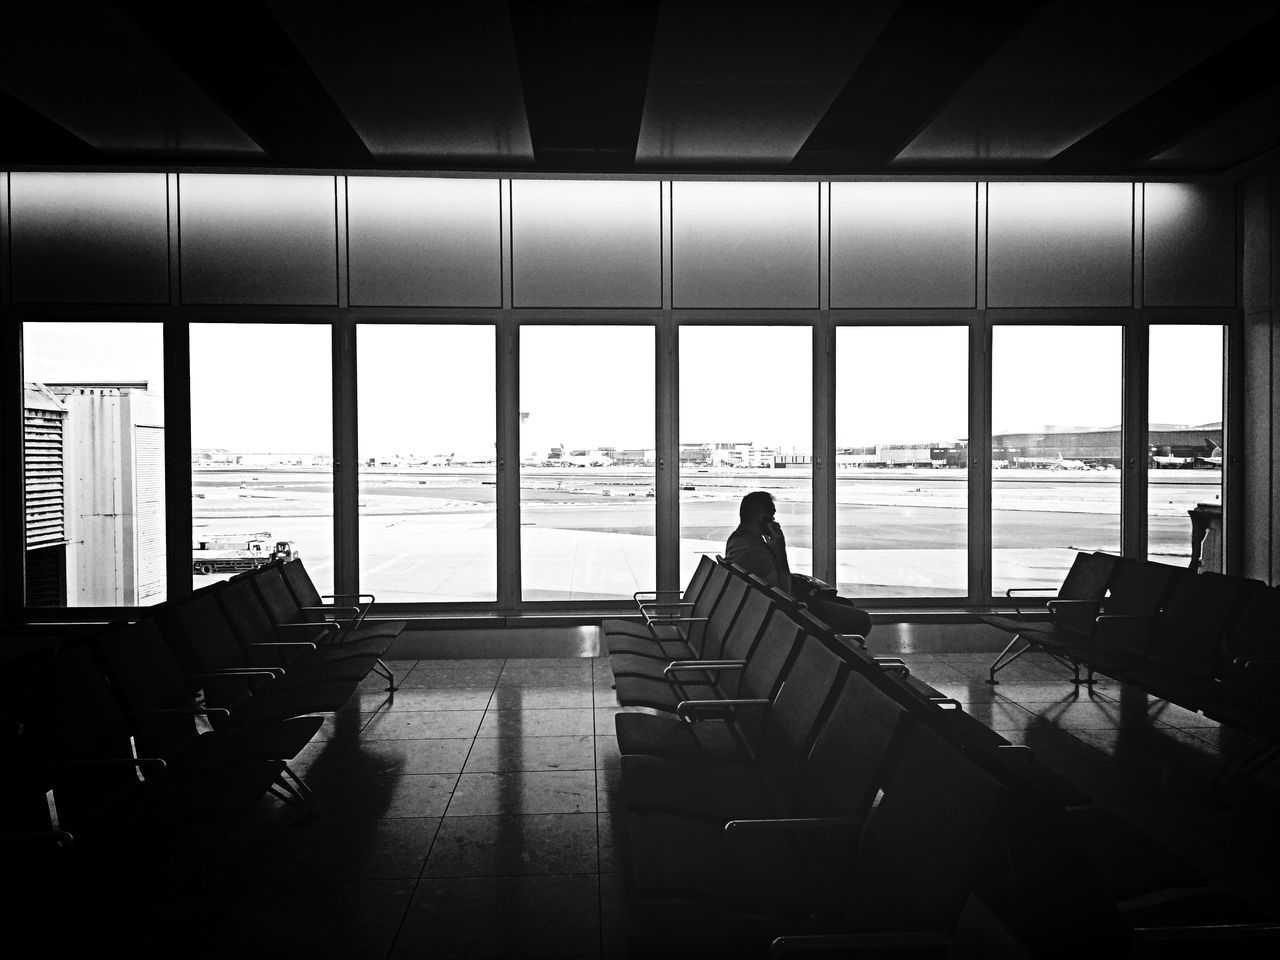 indoors, window, men, sea, silhouette, lifestyles, chair, glass - material, built structure, architecture, person, horizon over water, airport, sitting, leisure activity, restaurant, water, sky, table